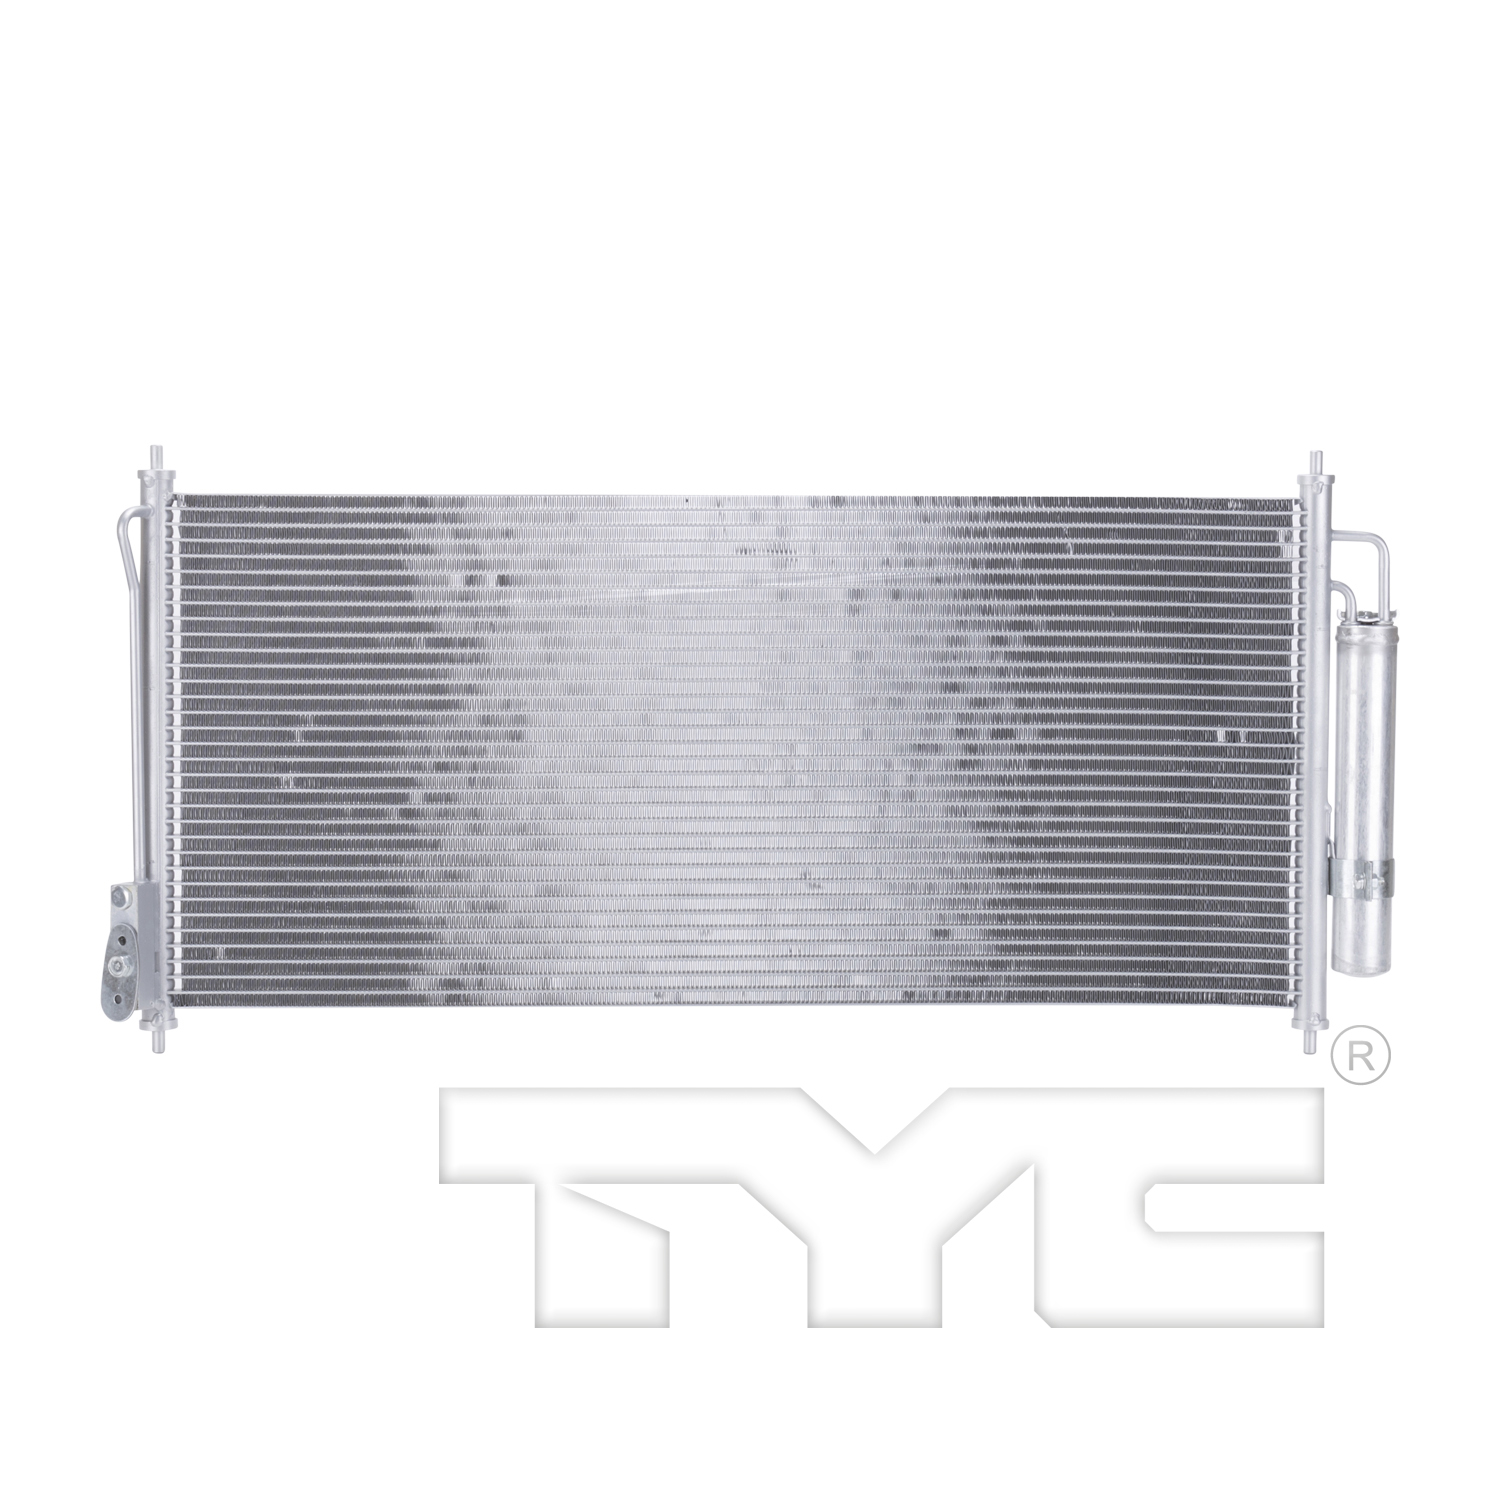 Aftermarket AC CONDENSERS for NISSAN - ALTIMA, ALTIMA,02-06,Air conditioning condenser